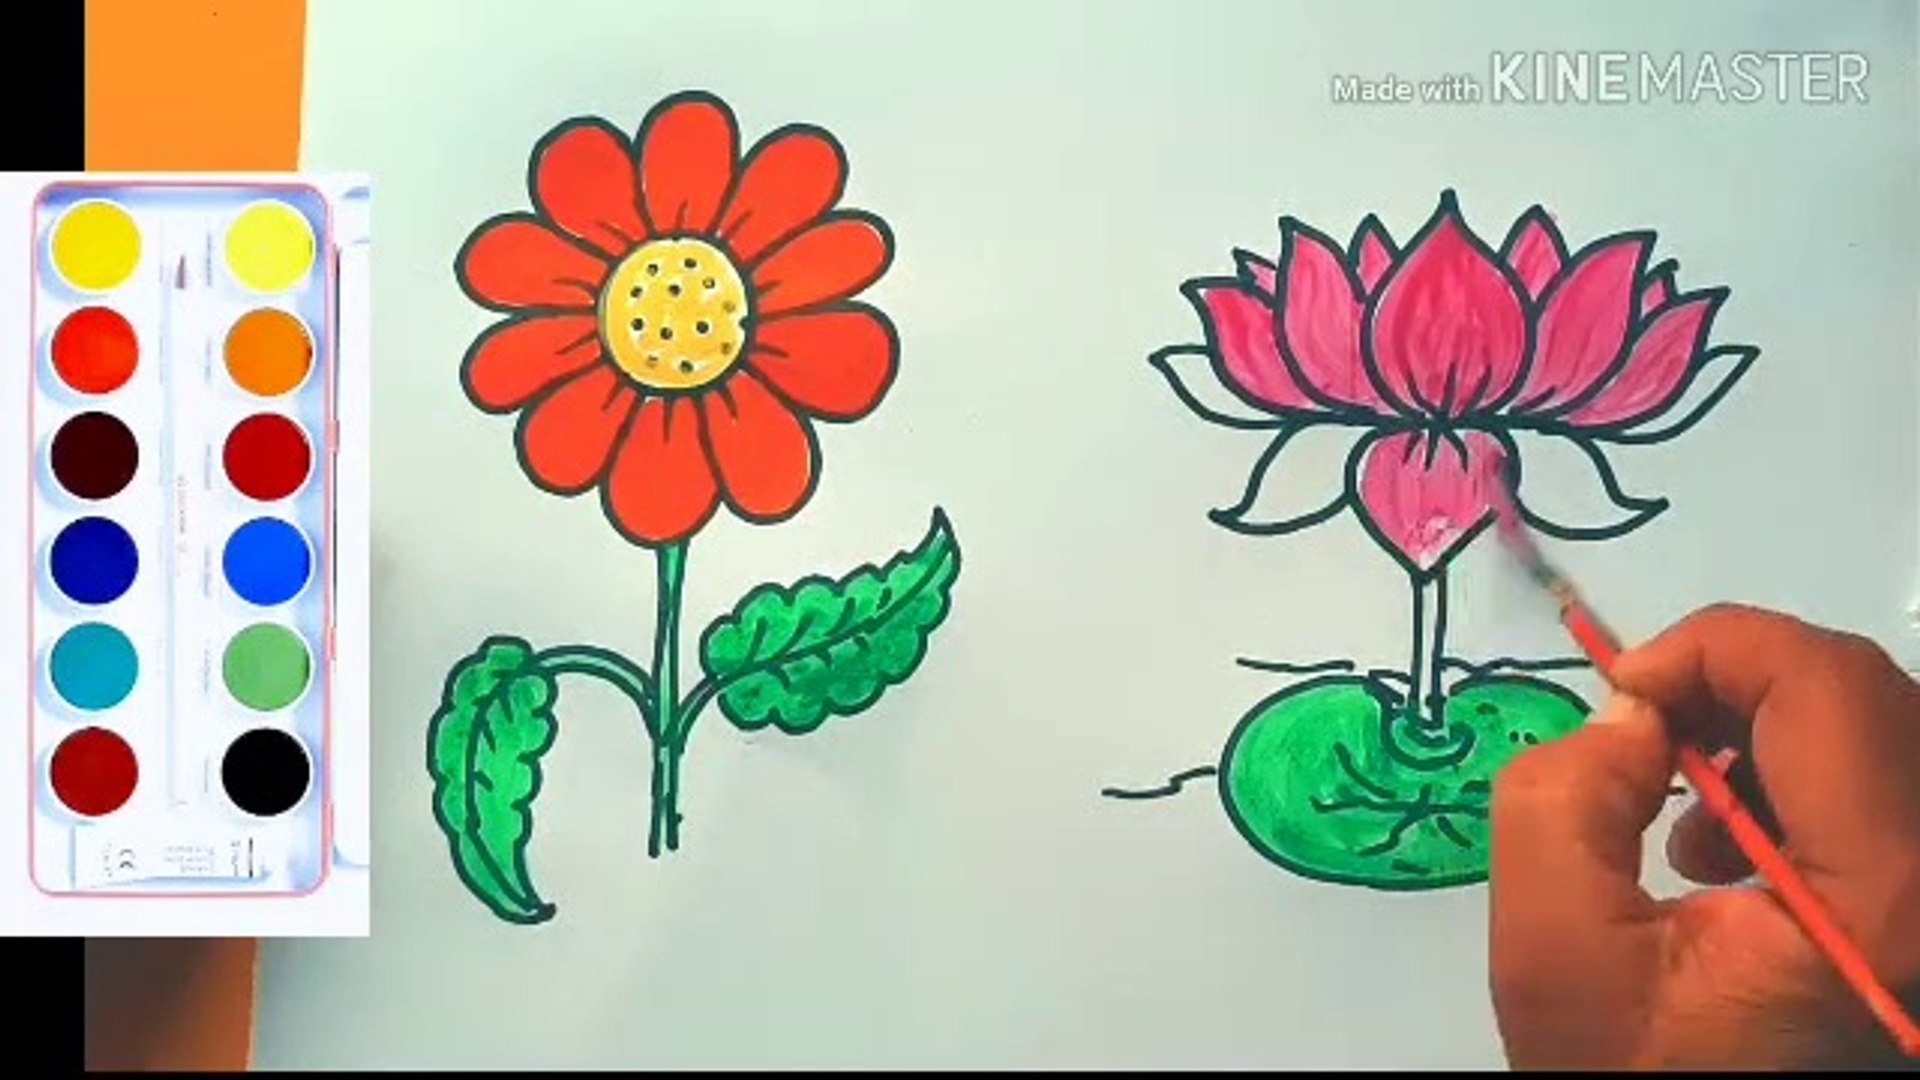 how to draw a lotus flower step by step for kids